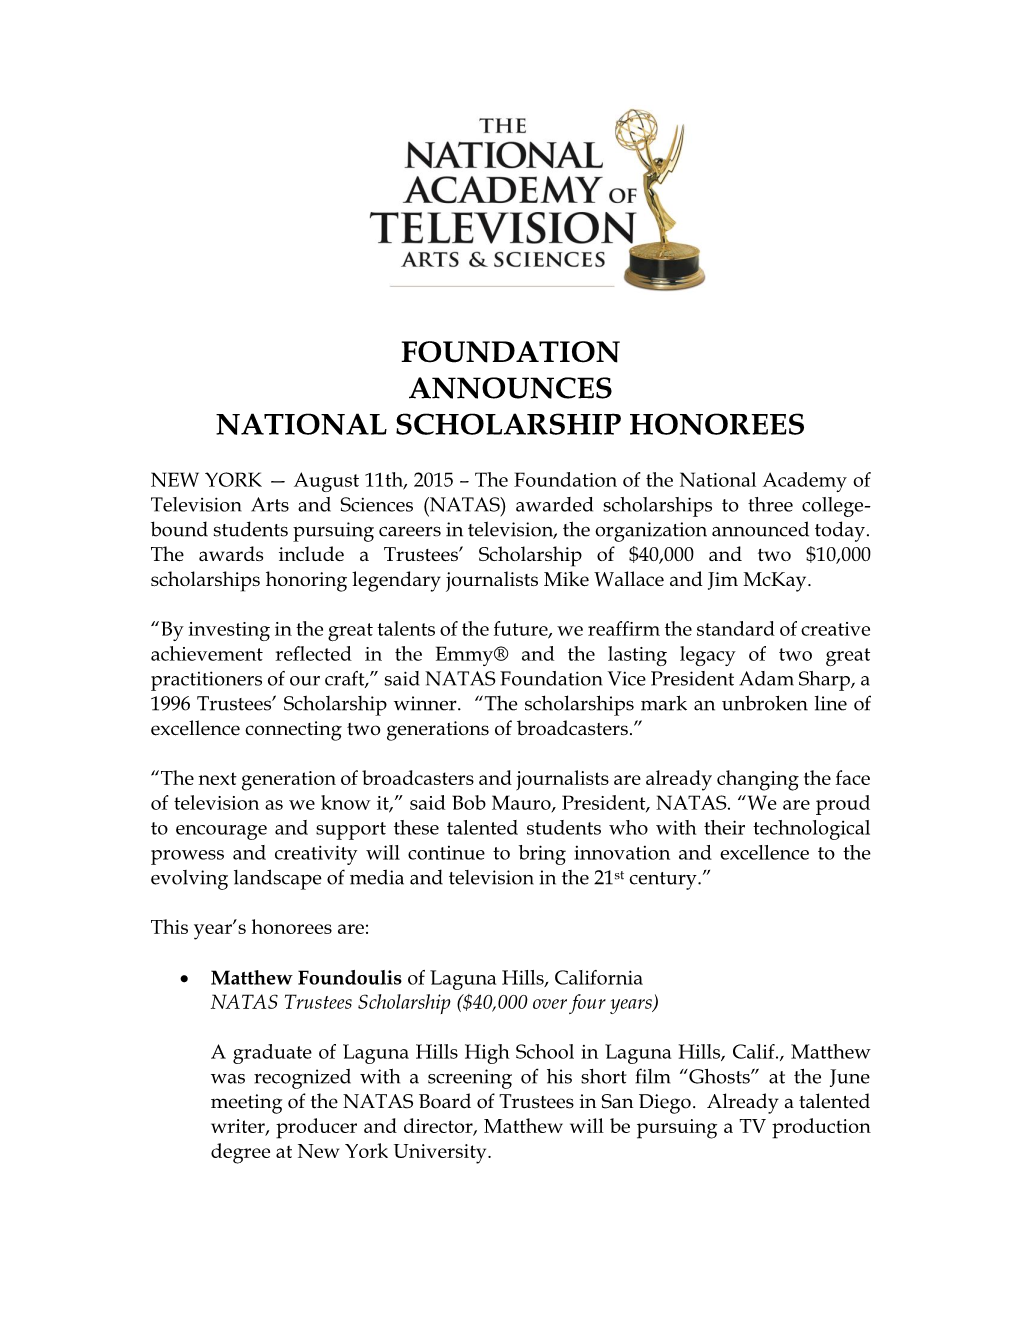 Foundation Announces National Scholarship Honorees